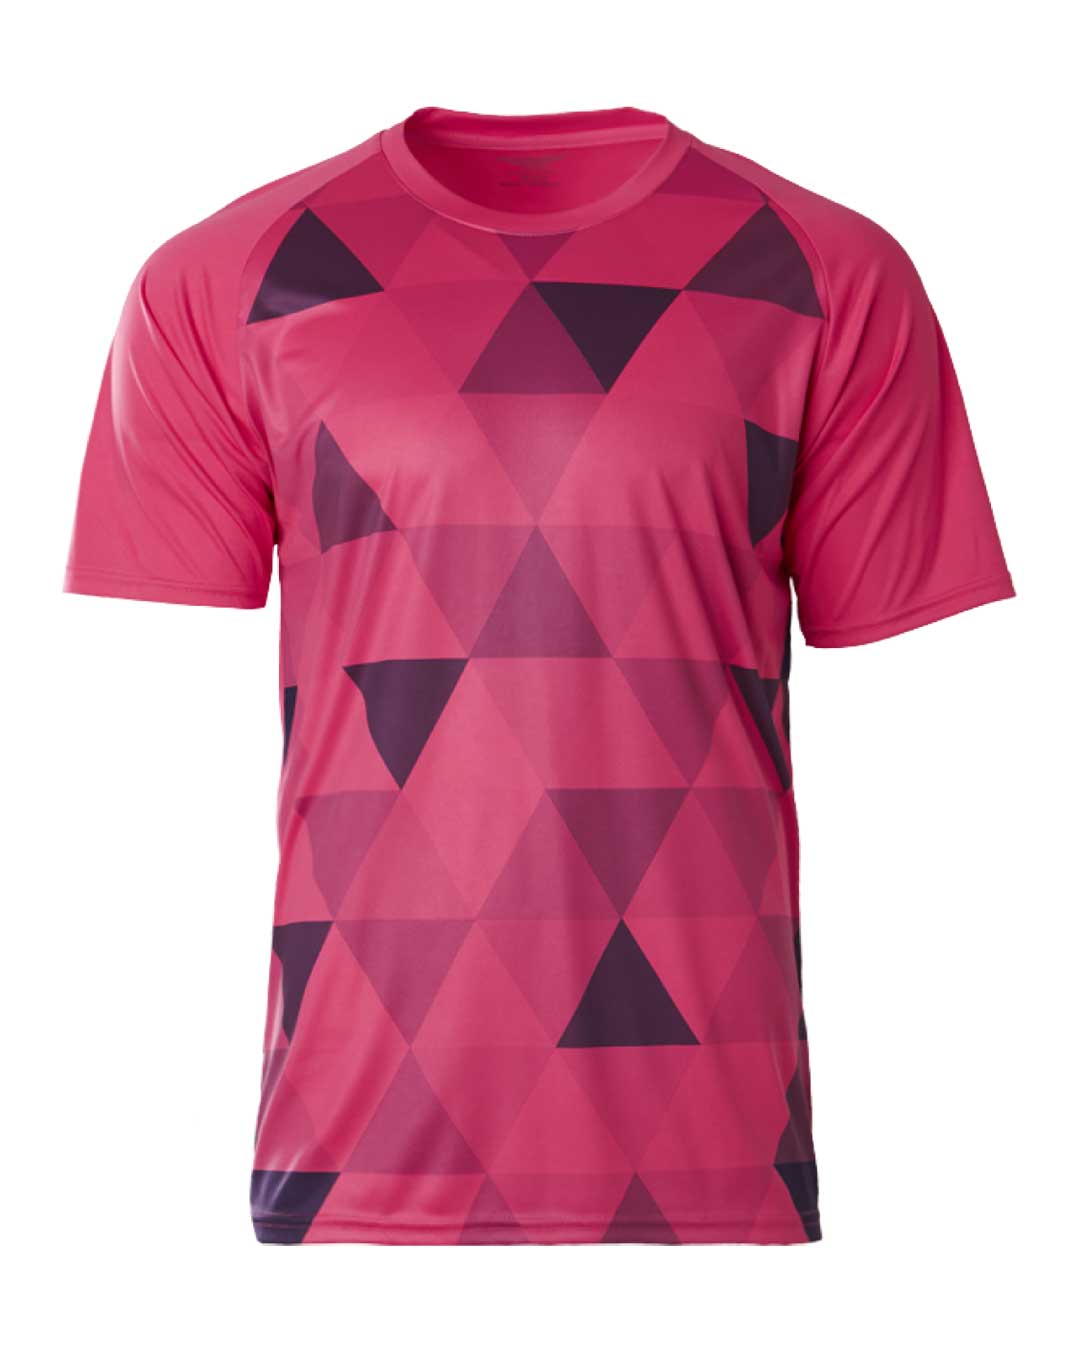 crossrunner® sublimated jersey crr 1900 trimosaic tee